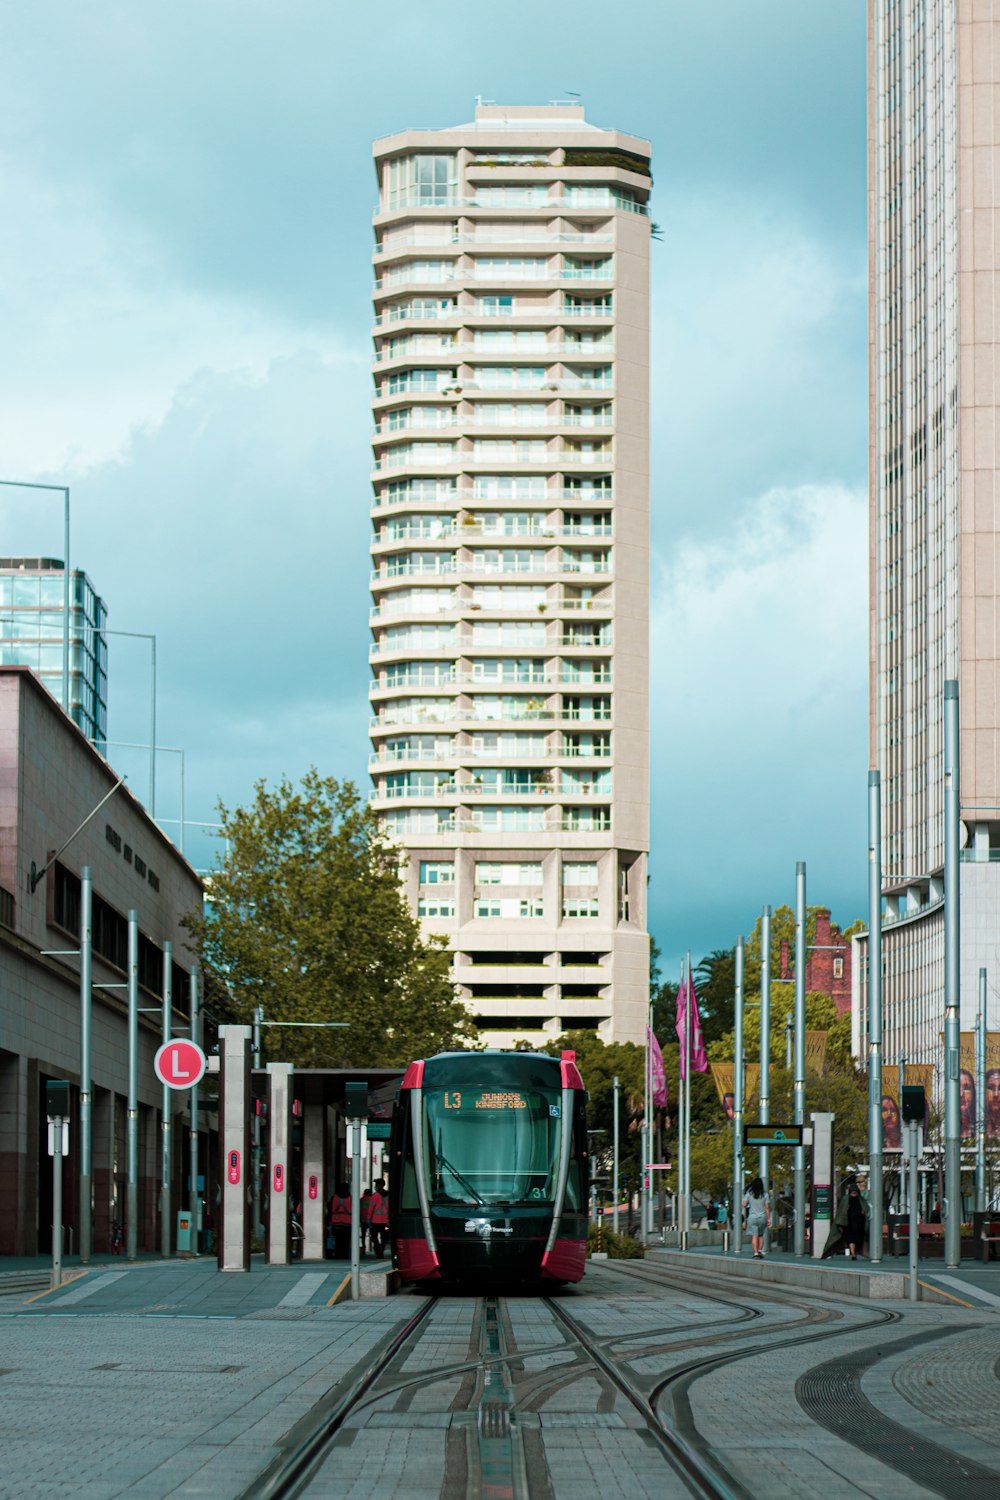 a train on a track in front of a tall building